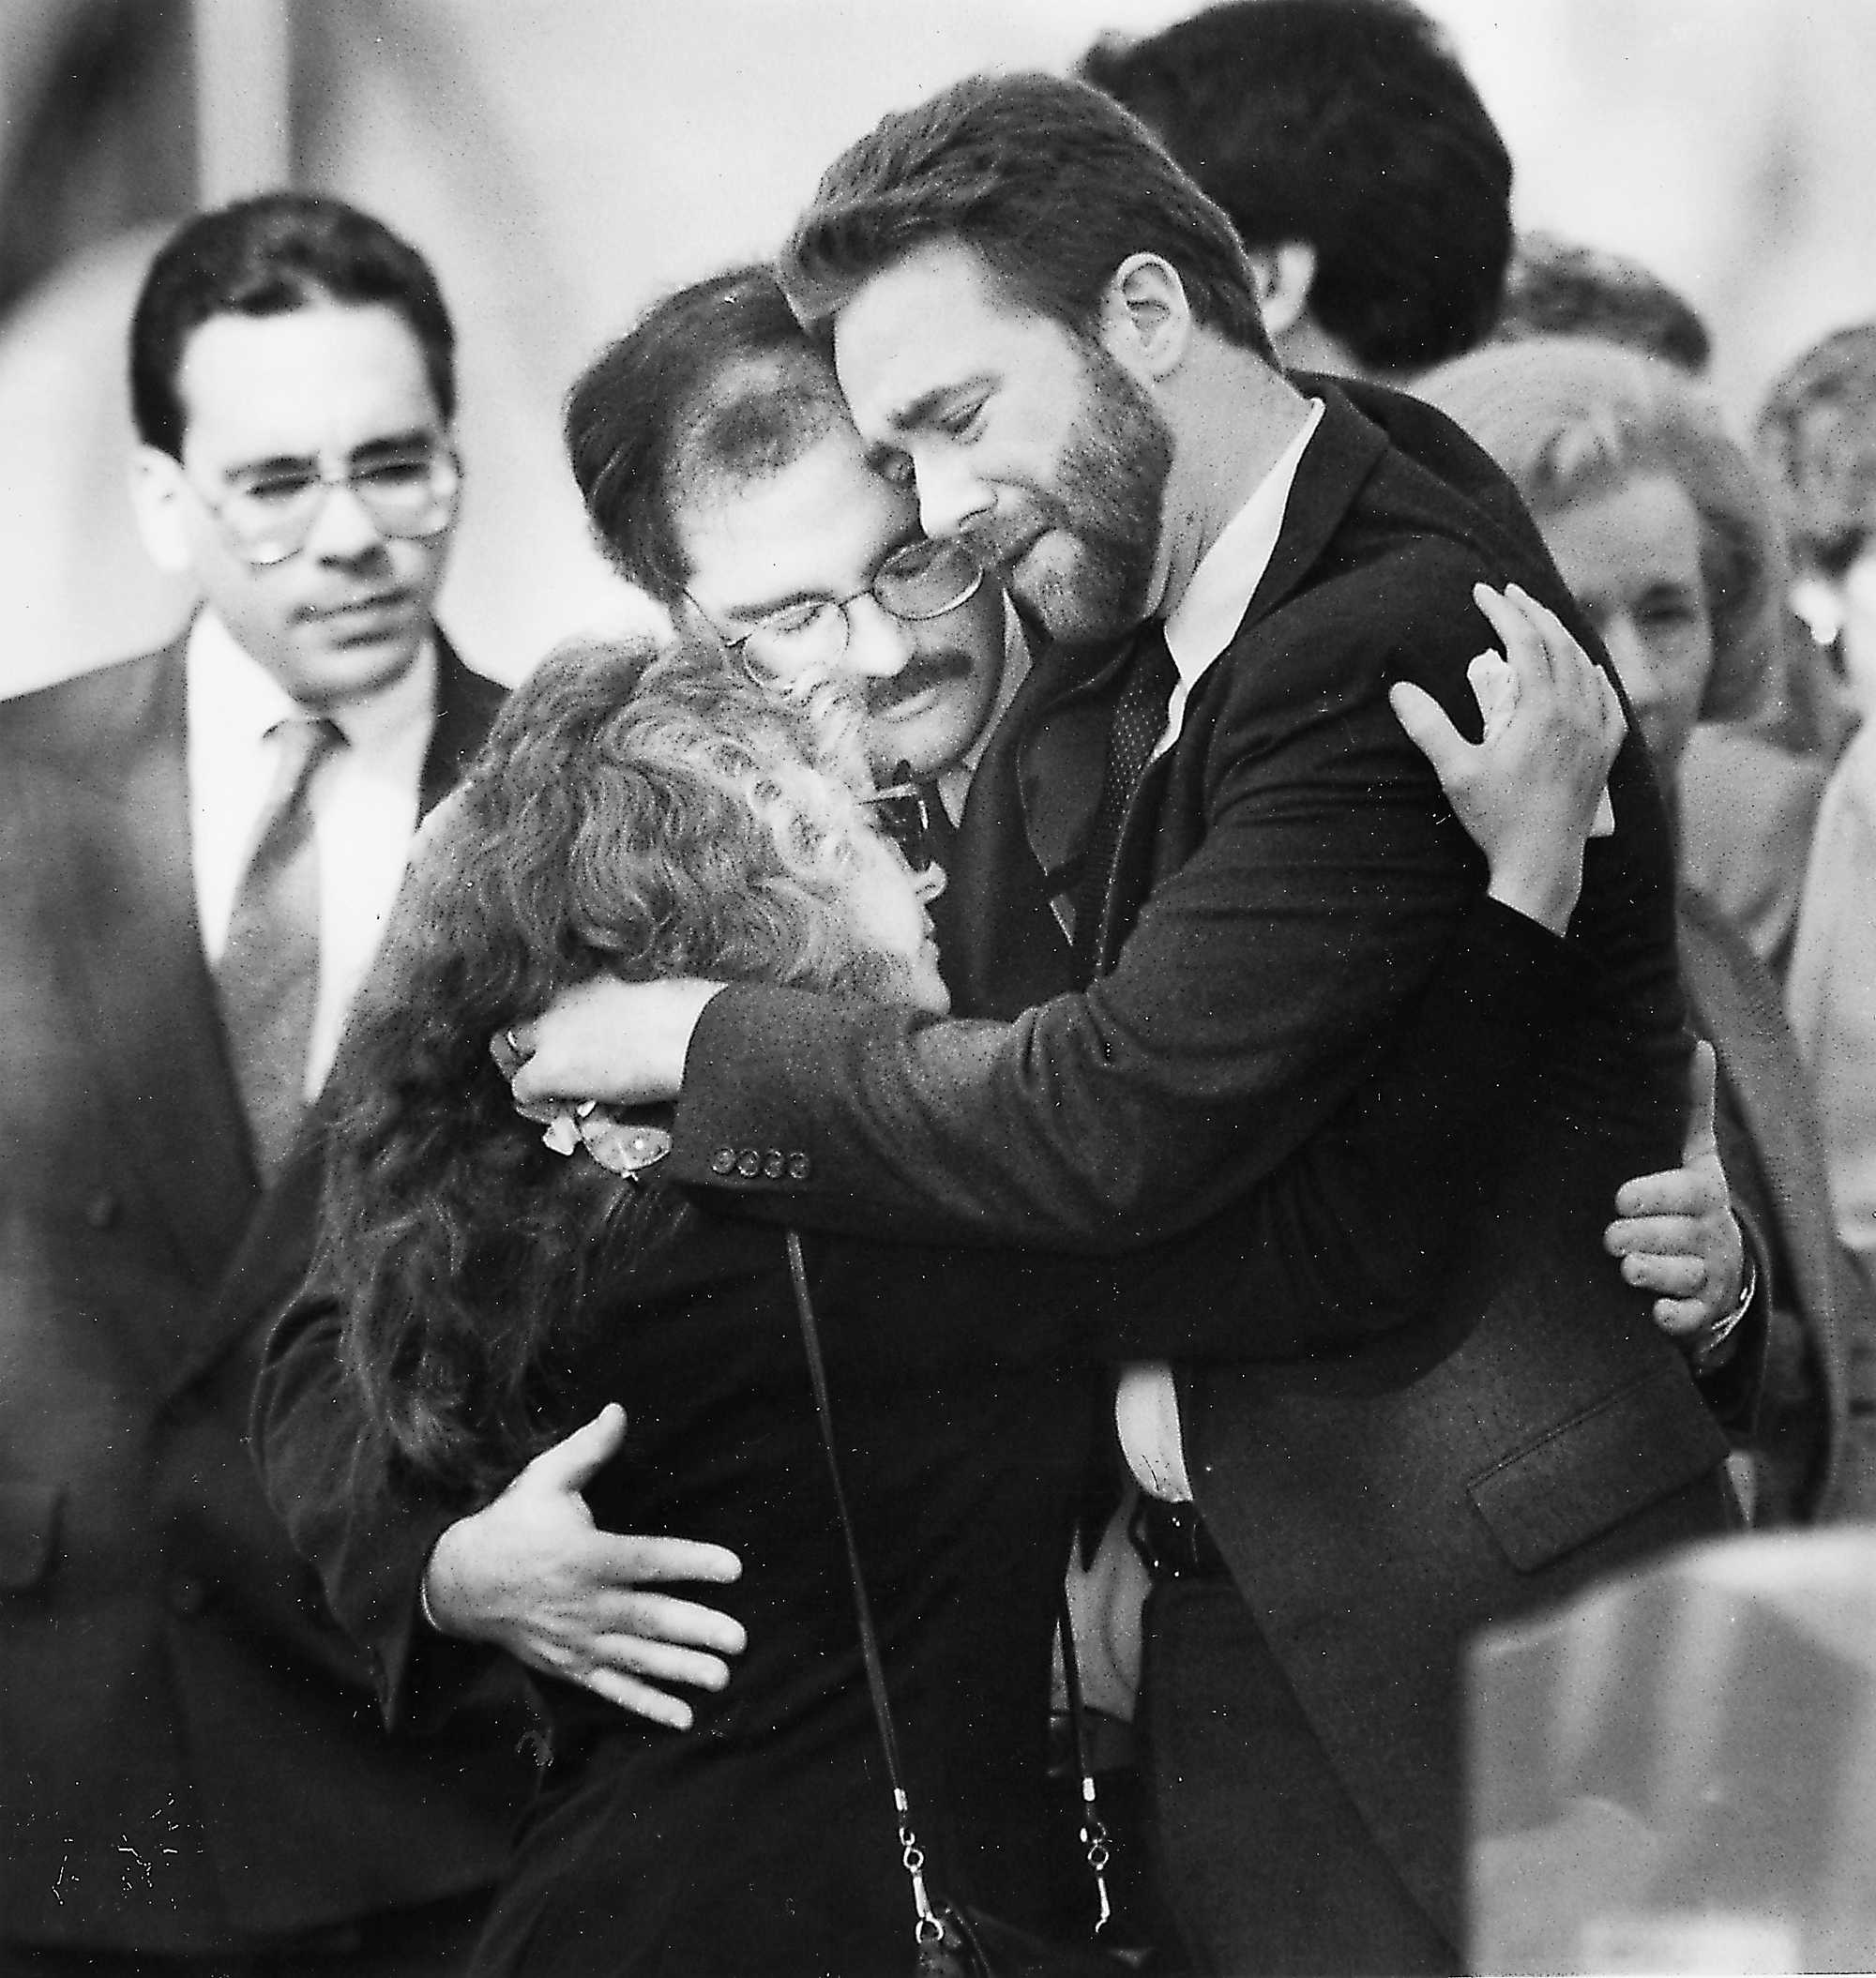 Mourners embraced at the funeral of Carol Stuart at St. James Church on Oct. 28, 1989.